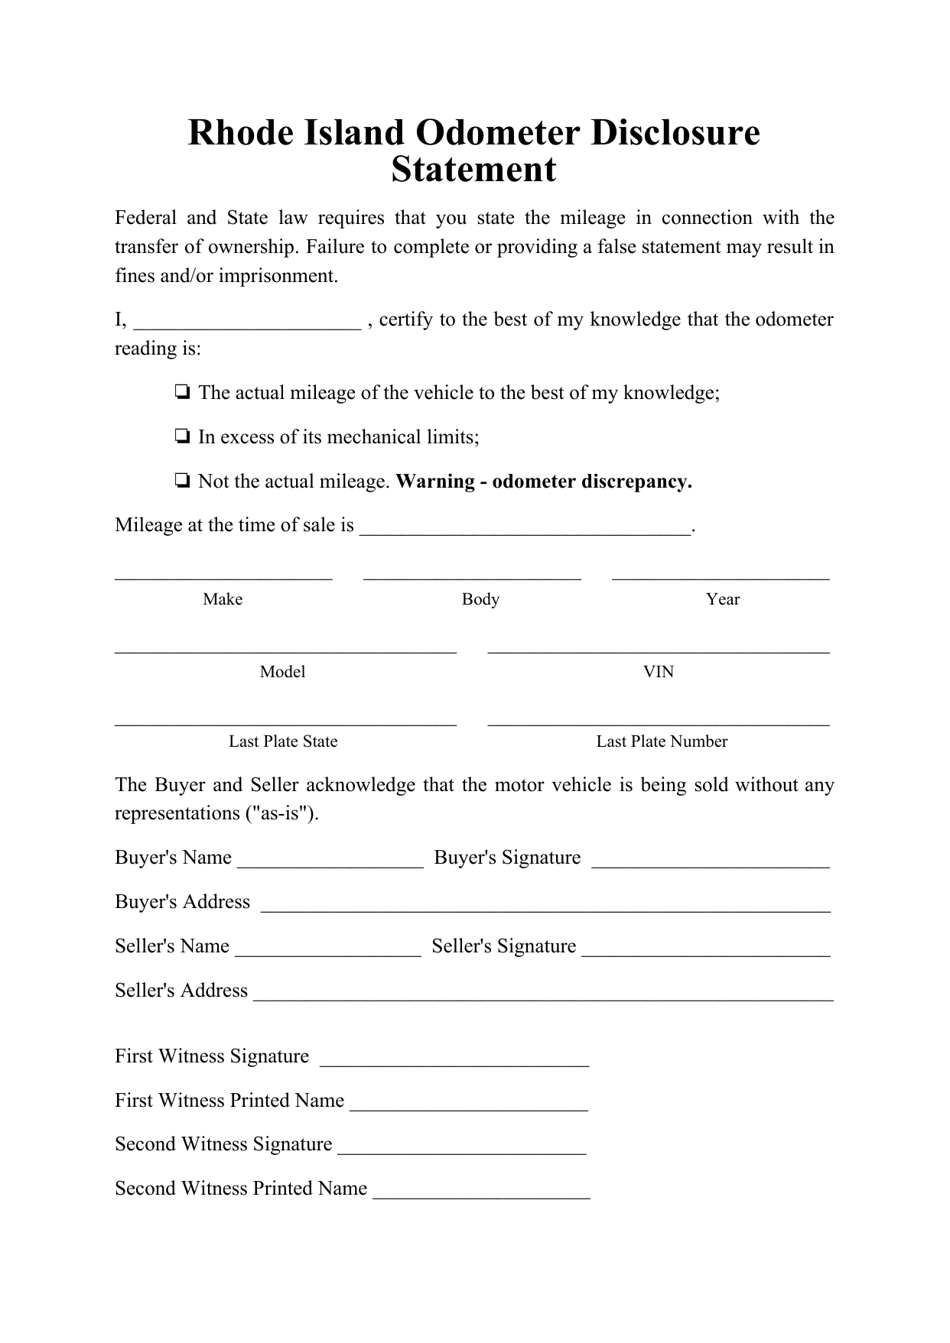 Odometer Disclosure Statement Form - Rhode Island, Page 1